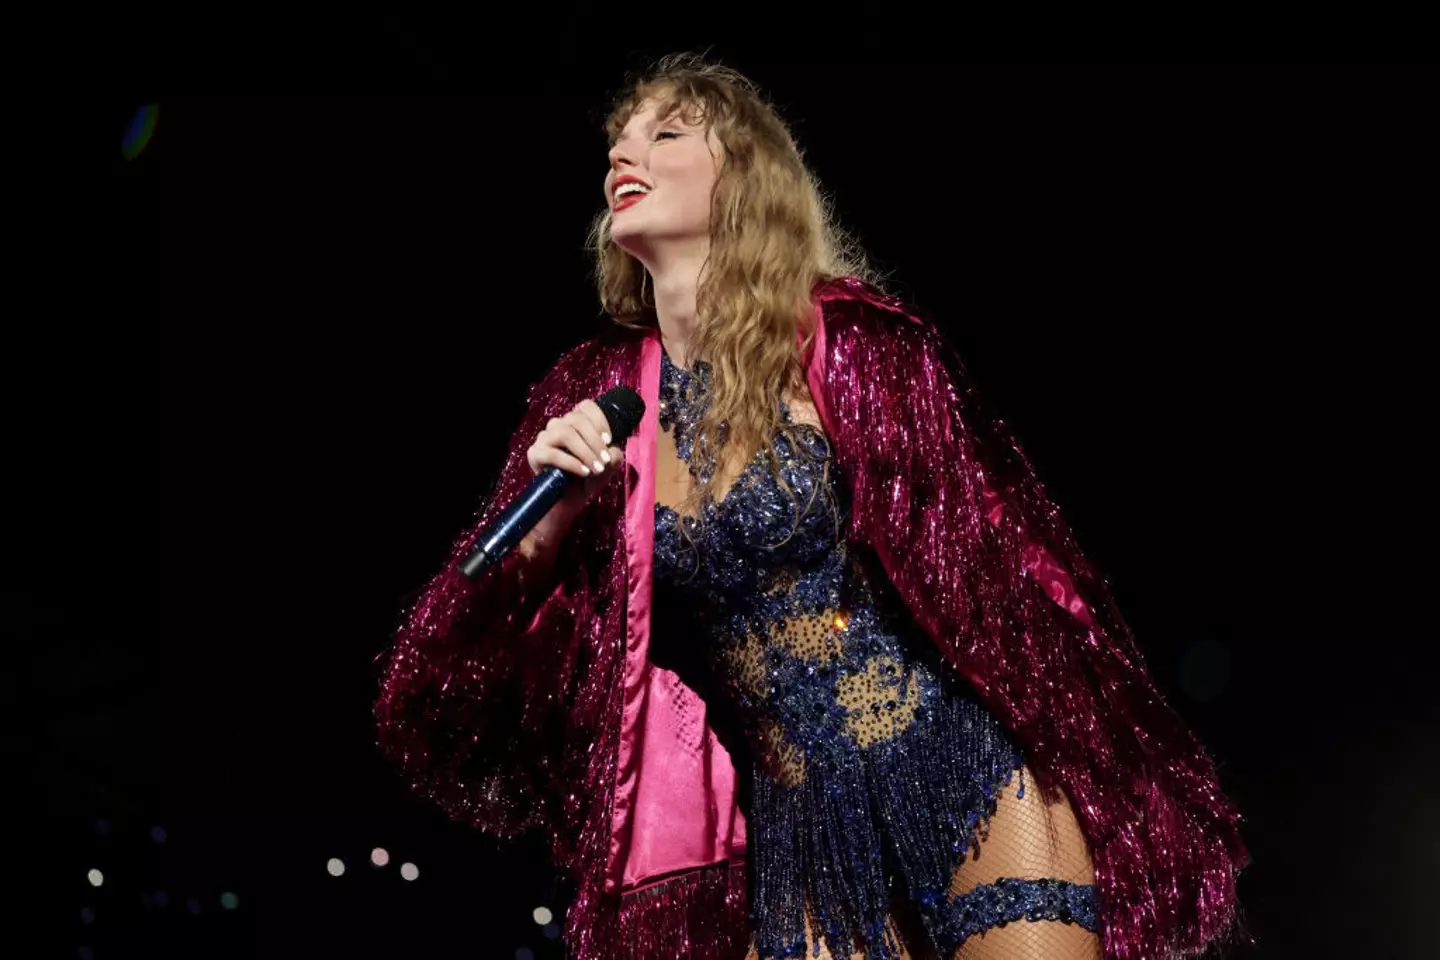 Taylor Swift has dropped her latest album The Tortured Poets Department on the world. (Ashok Kumar/TAS24 / Contributor / Getty Images)